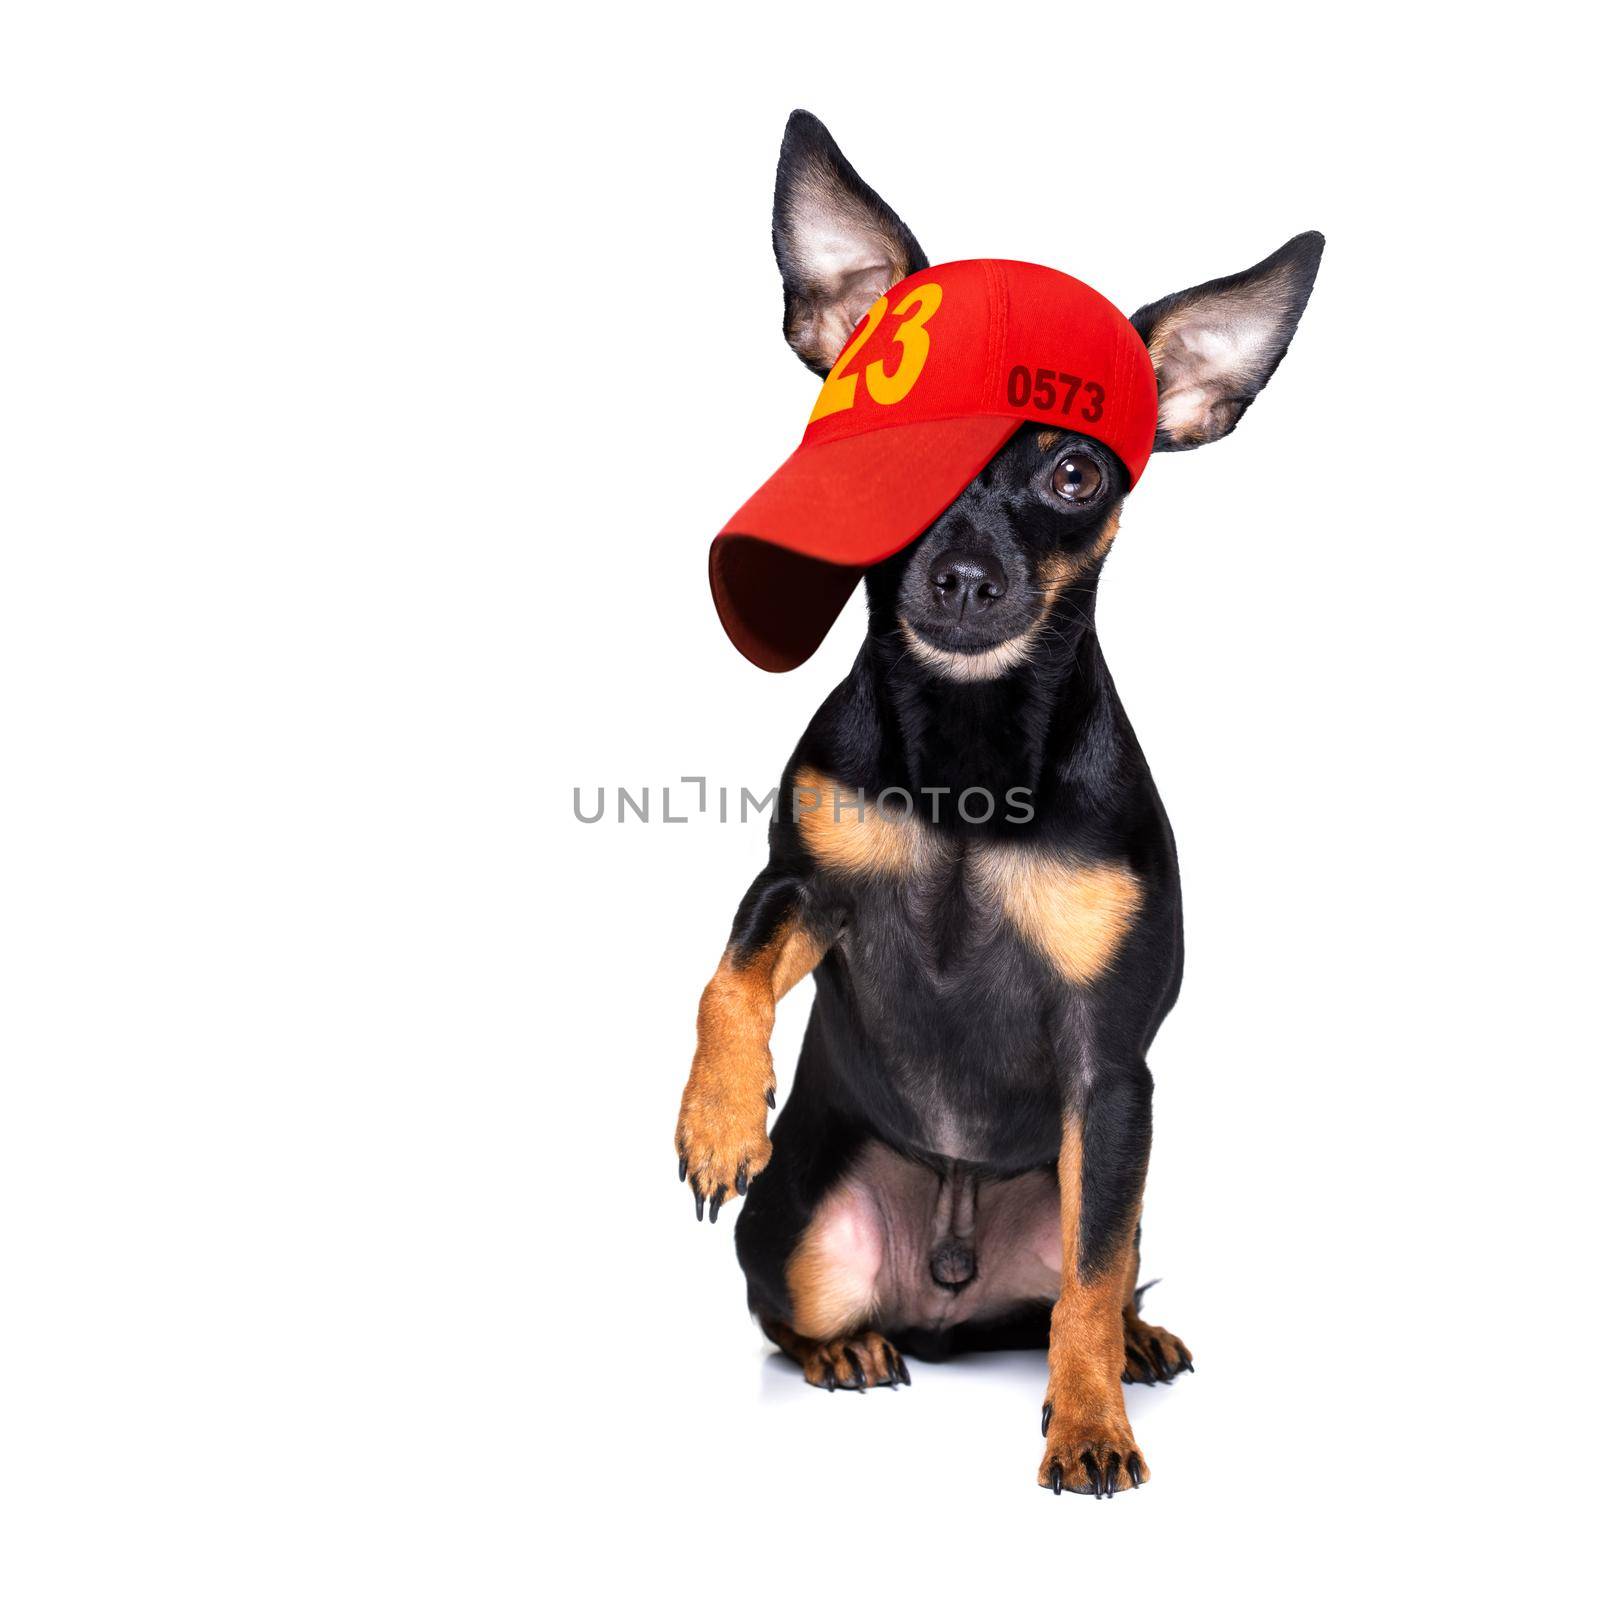 cool casual look prague ratter  dog wearing a baseball cap or hat , sporty and fit , isolated on white background waiting for a walk